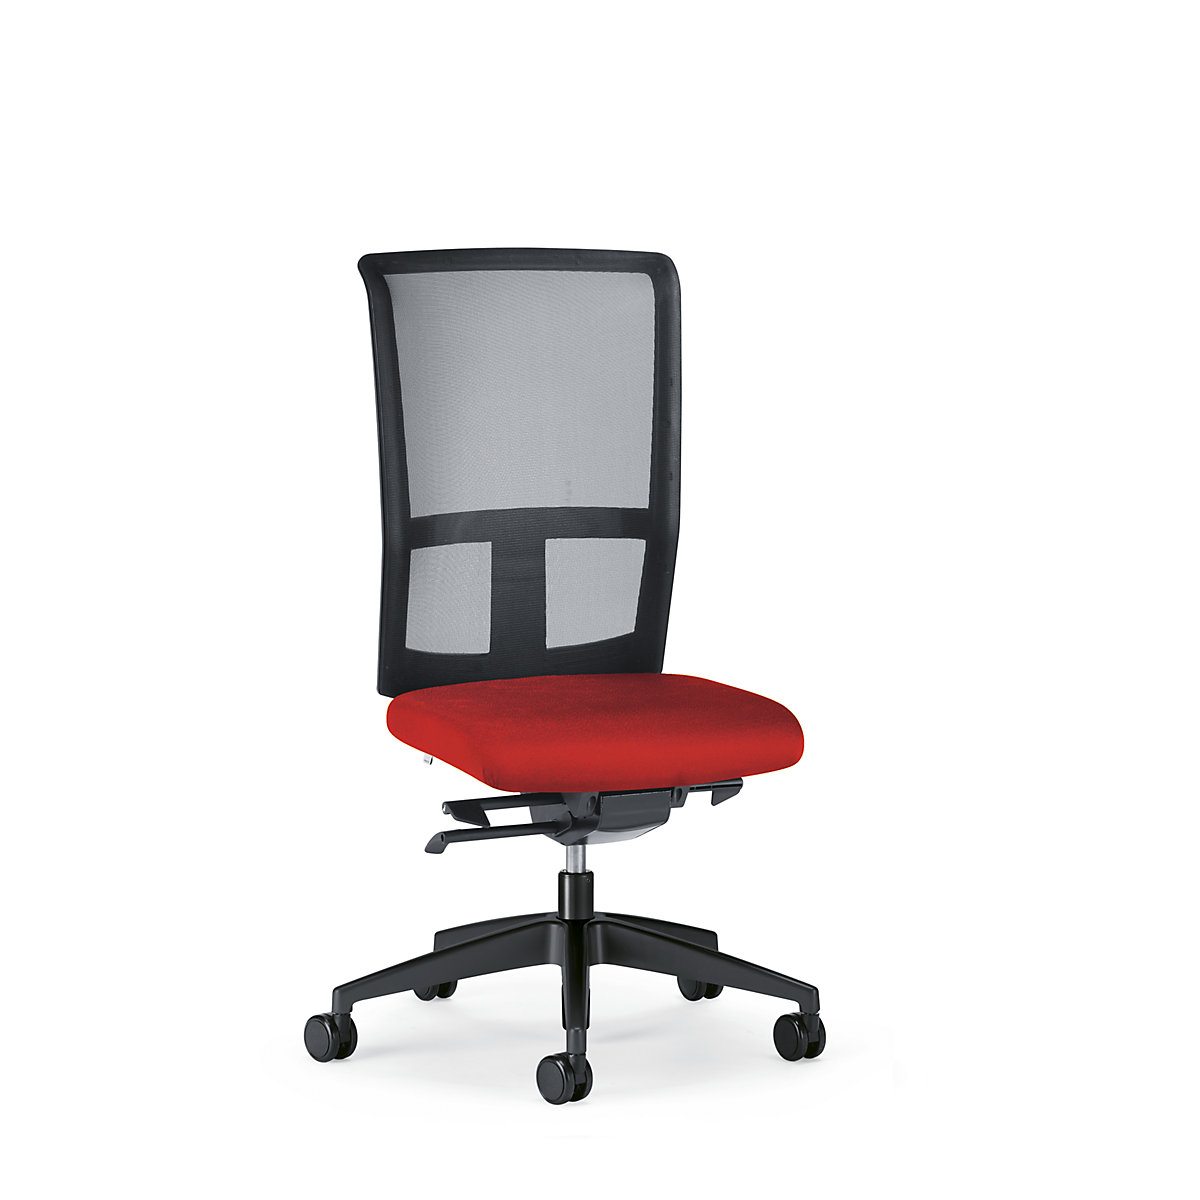 GOAL AIR office swivel chair, back rest height 545 mm – interstuhl, black frame, with hard castors, flame red, seat depth 410 mm-5